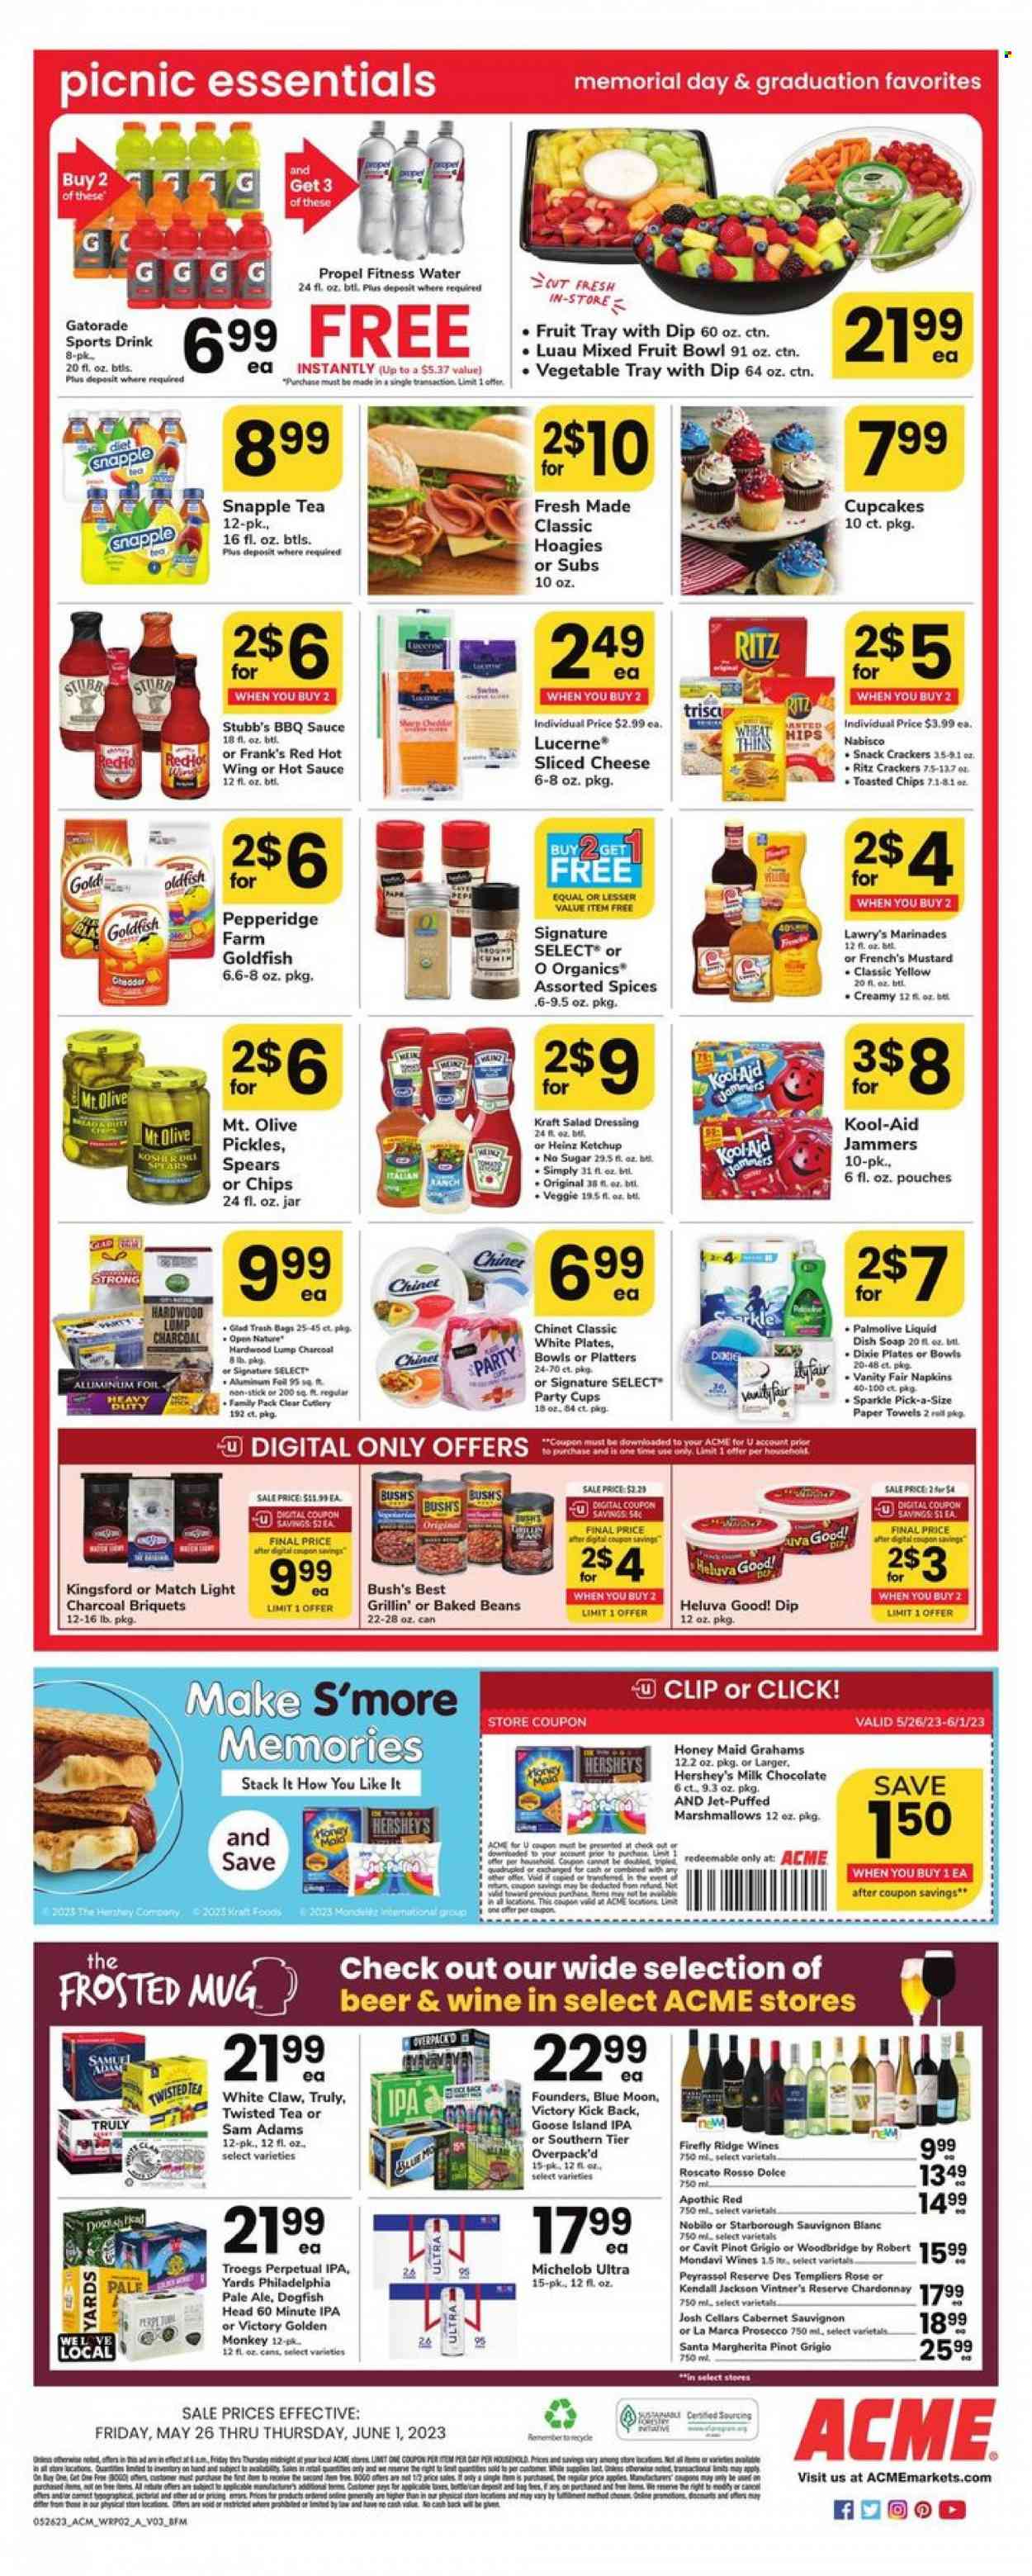 thumbnail - ACME Flyer - 05/26/2023 - 06/01/2023 - Sales products - cupcake, beans, fruit cup, sauce, Kraft®, Kingsford, snack, sliced cheese, Philadelphia, cheese, dip, Hershey's, marshmallows, milk chocolate, chocolate, crackers, Santa, RITZ, Nabisco, chips, Thins, Goldfish, salty snack, Heinz, baked beans, Honey Maid, BBQ sauce, mustard, salad dressing, hot sauce, ketchup, dressing, ice tea, Snapple, Gatorade, sparkling water, water, powder drink, Cabernet Sauvignon, red wine, sparkling wine, white wine, prosecco, Chardonnay, wine, alcohol, Pinot Grigio, Sauvignon Blanc, Woodbridge by Robert Mondavi, Woodbridge, White Claw, TRULY, beer, Victory Golden, IPA, napkins, kitchen towels, paper towels, dishwashing liquid, Jet, Palmolive, trash bags, mug, plate, cup, bowl, platters, aluminium foil, party cups, Dixie, monkey, electrolyte drink, Blue Moon, Twisted Tea, Michelob. Page 2.